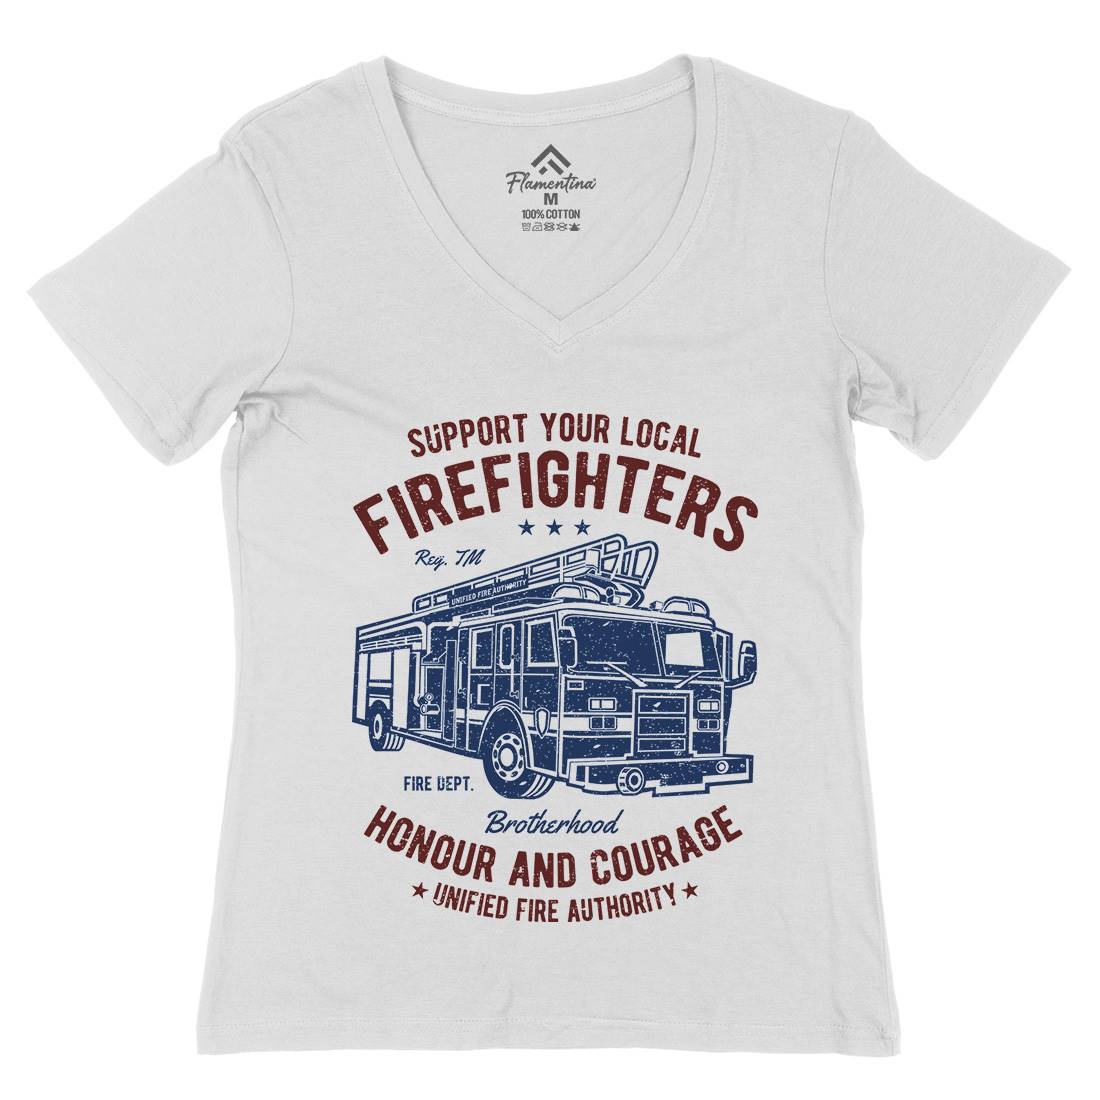 Fire Fighters Truck Womens Organic V-Neck T-Shirt Firefighters A054